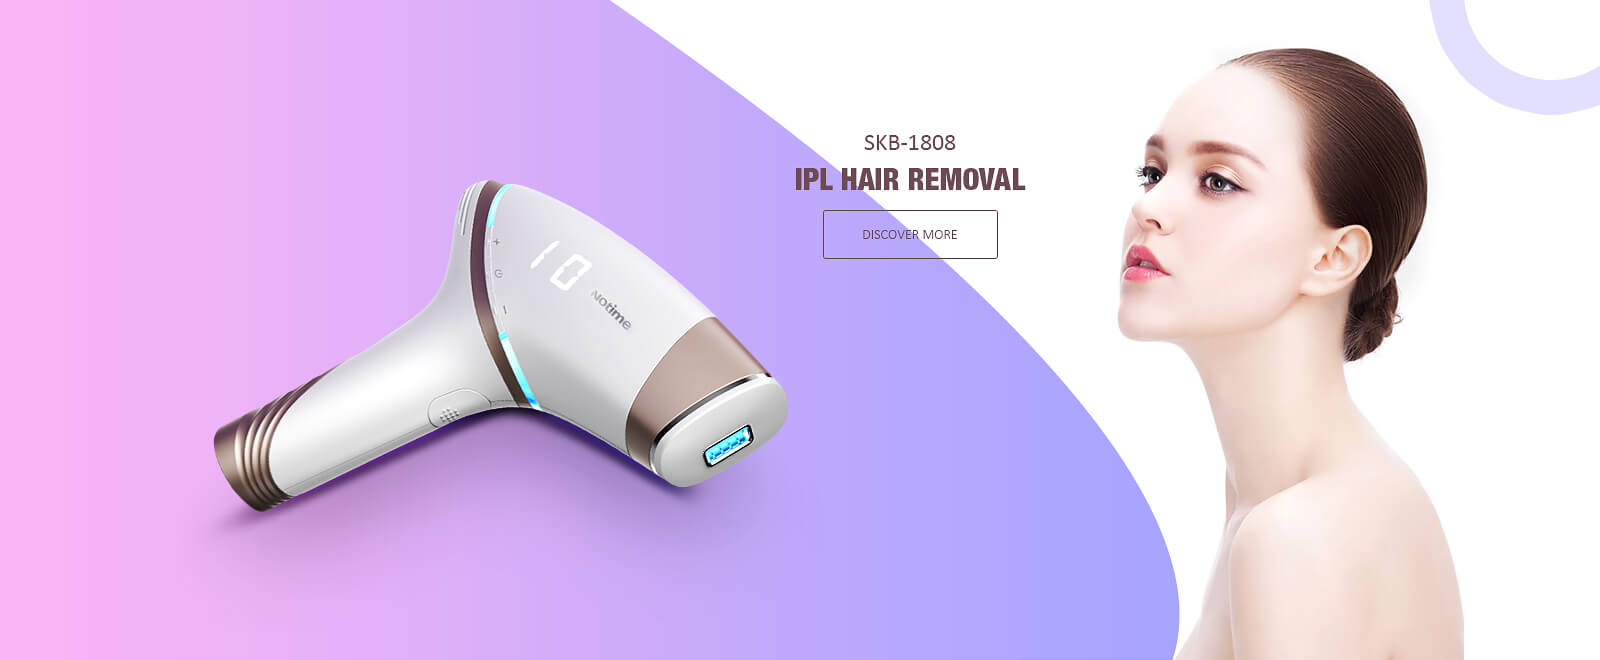 IPL Hair Removal Supplier